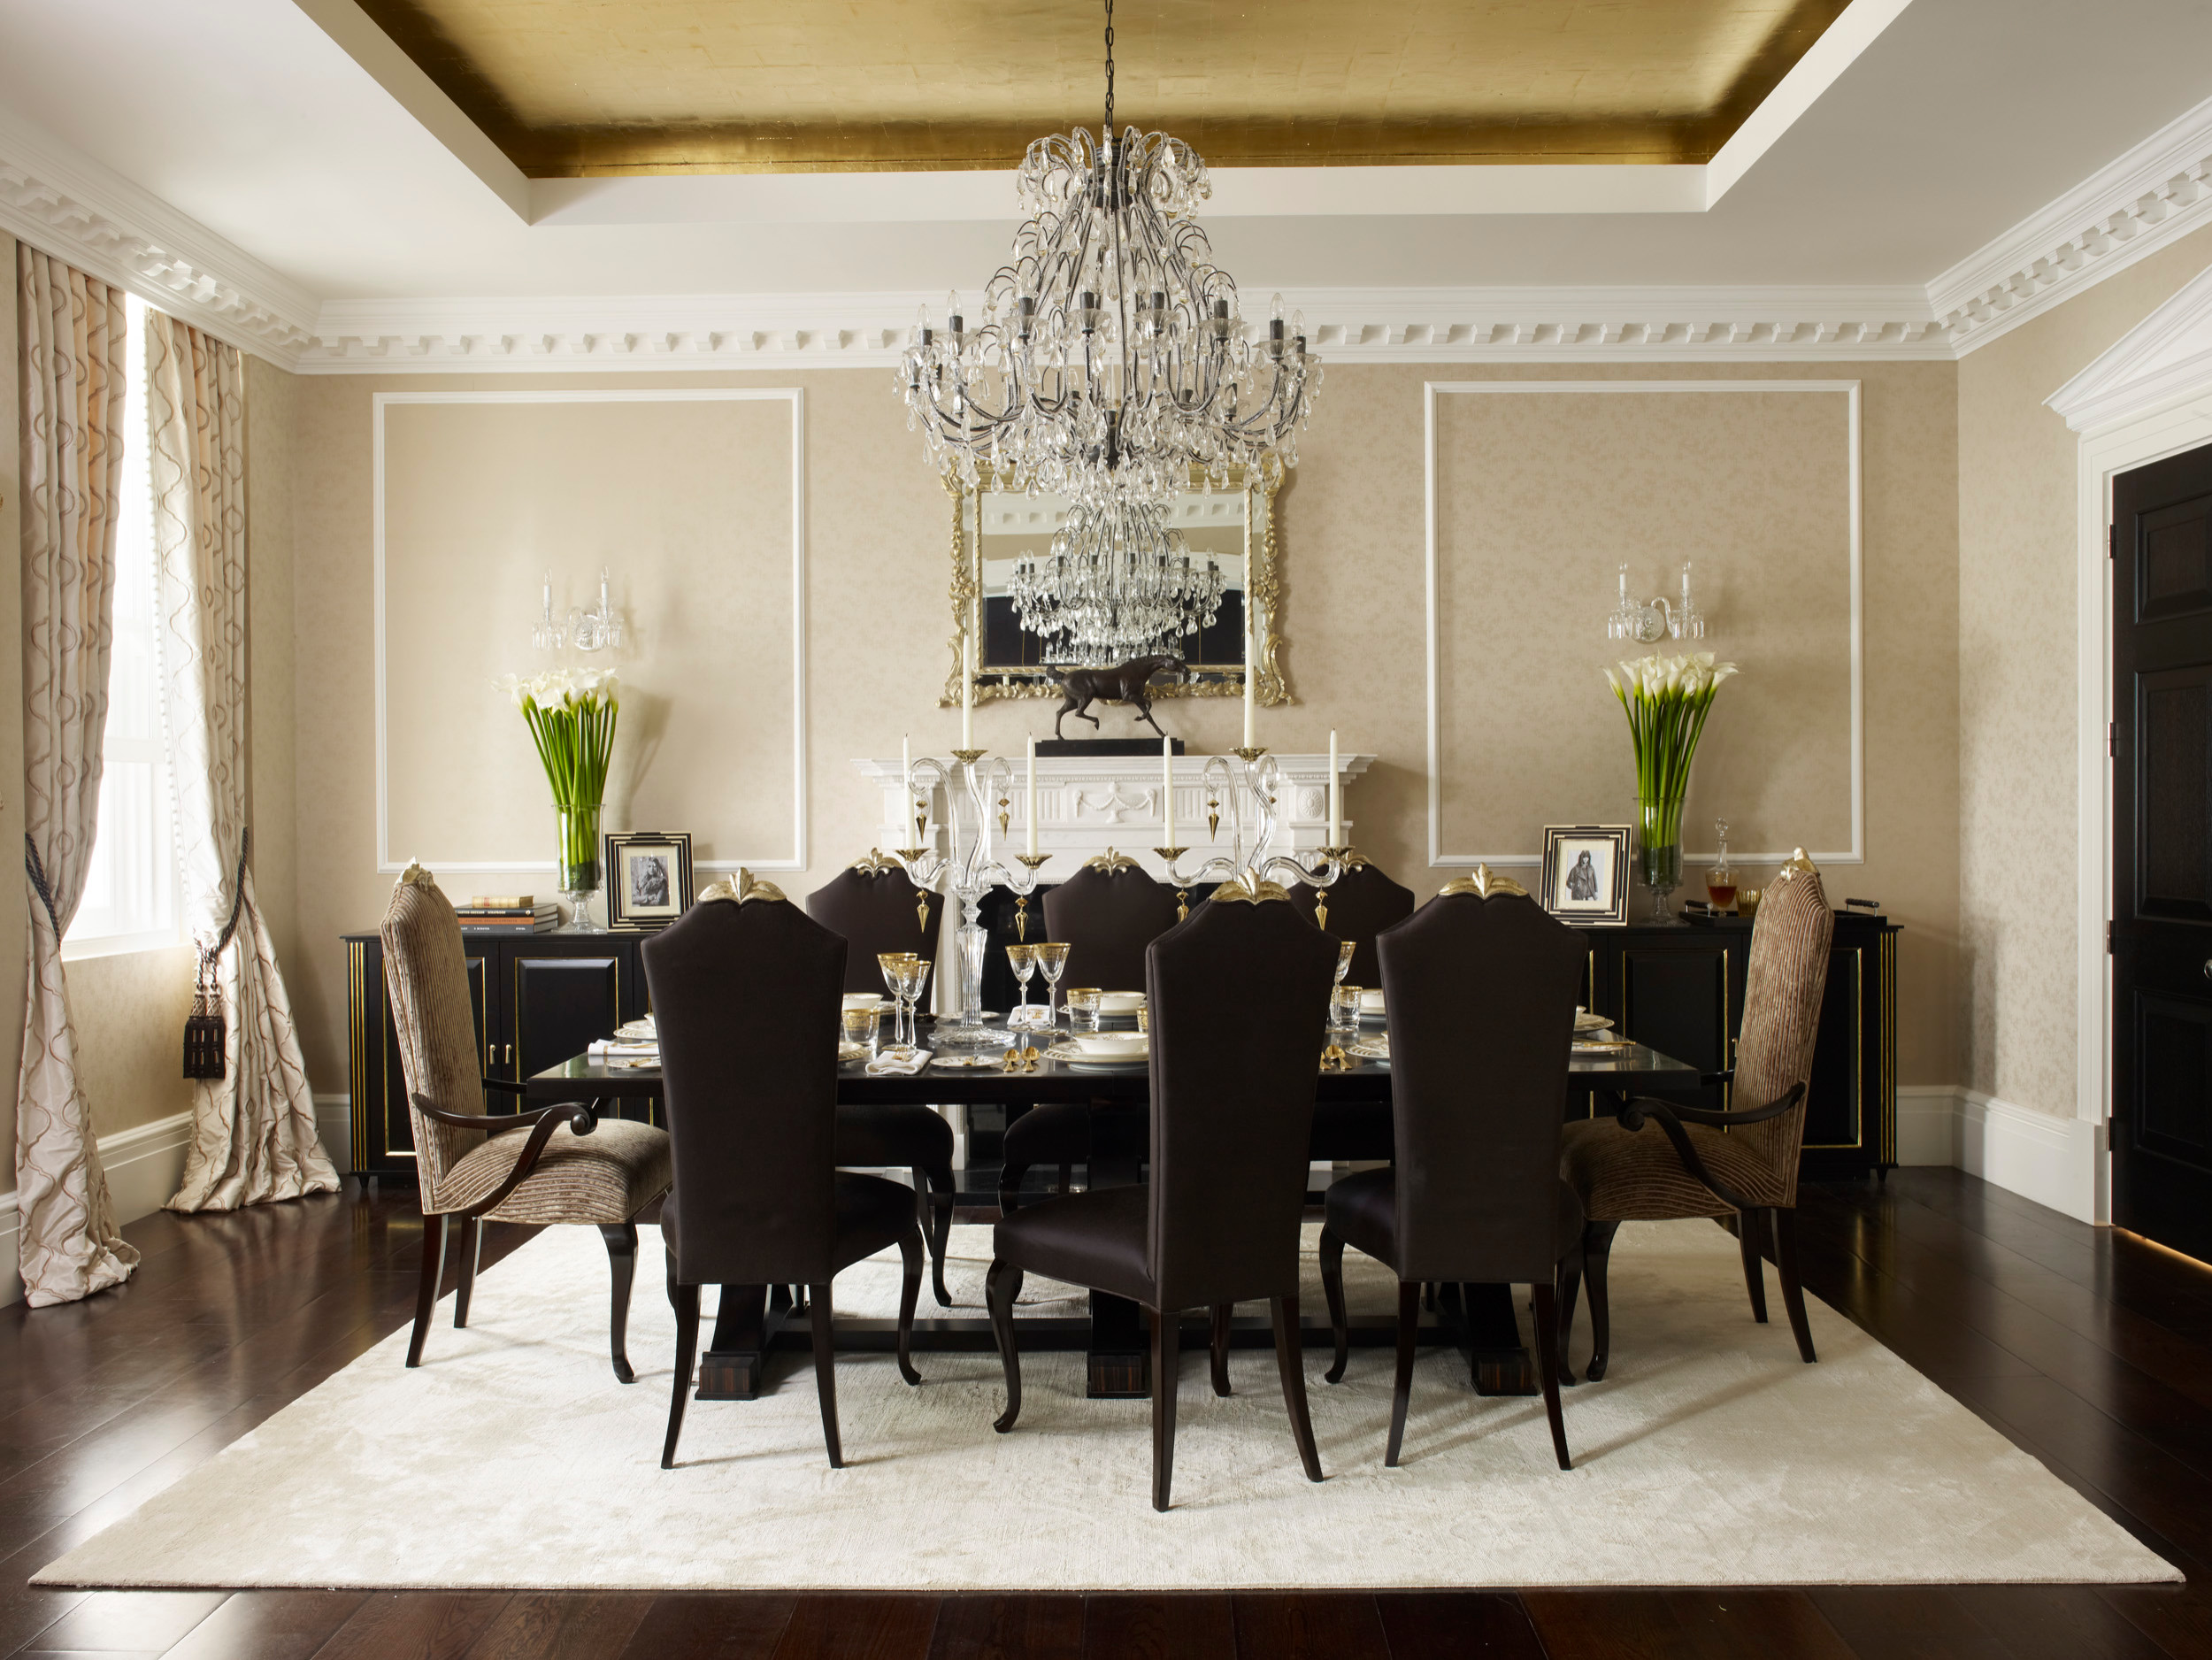 townhouse dining room decorating ideas